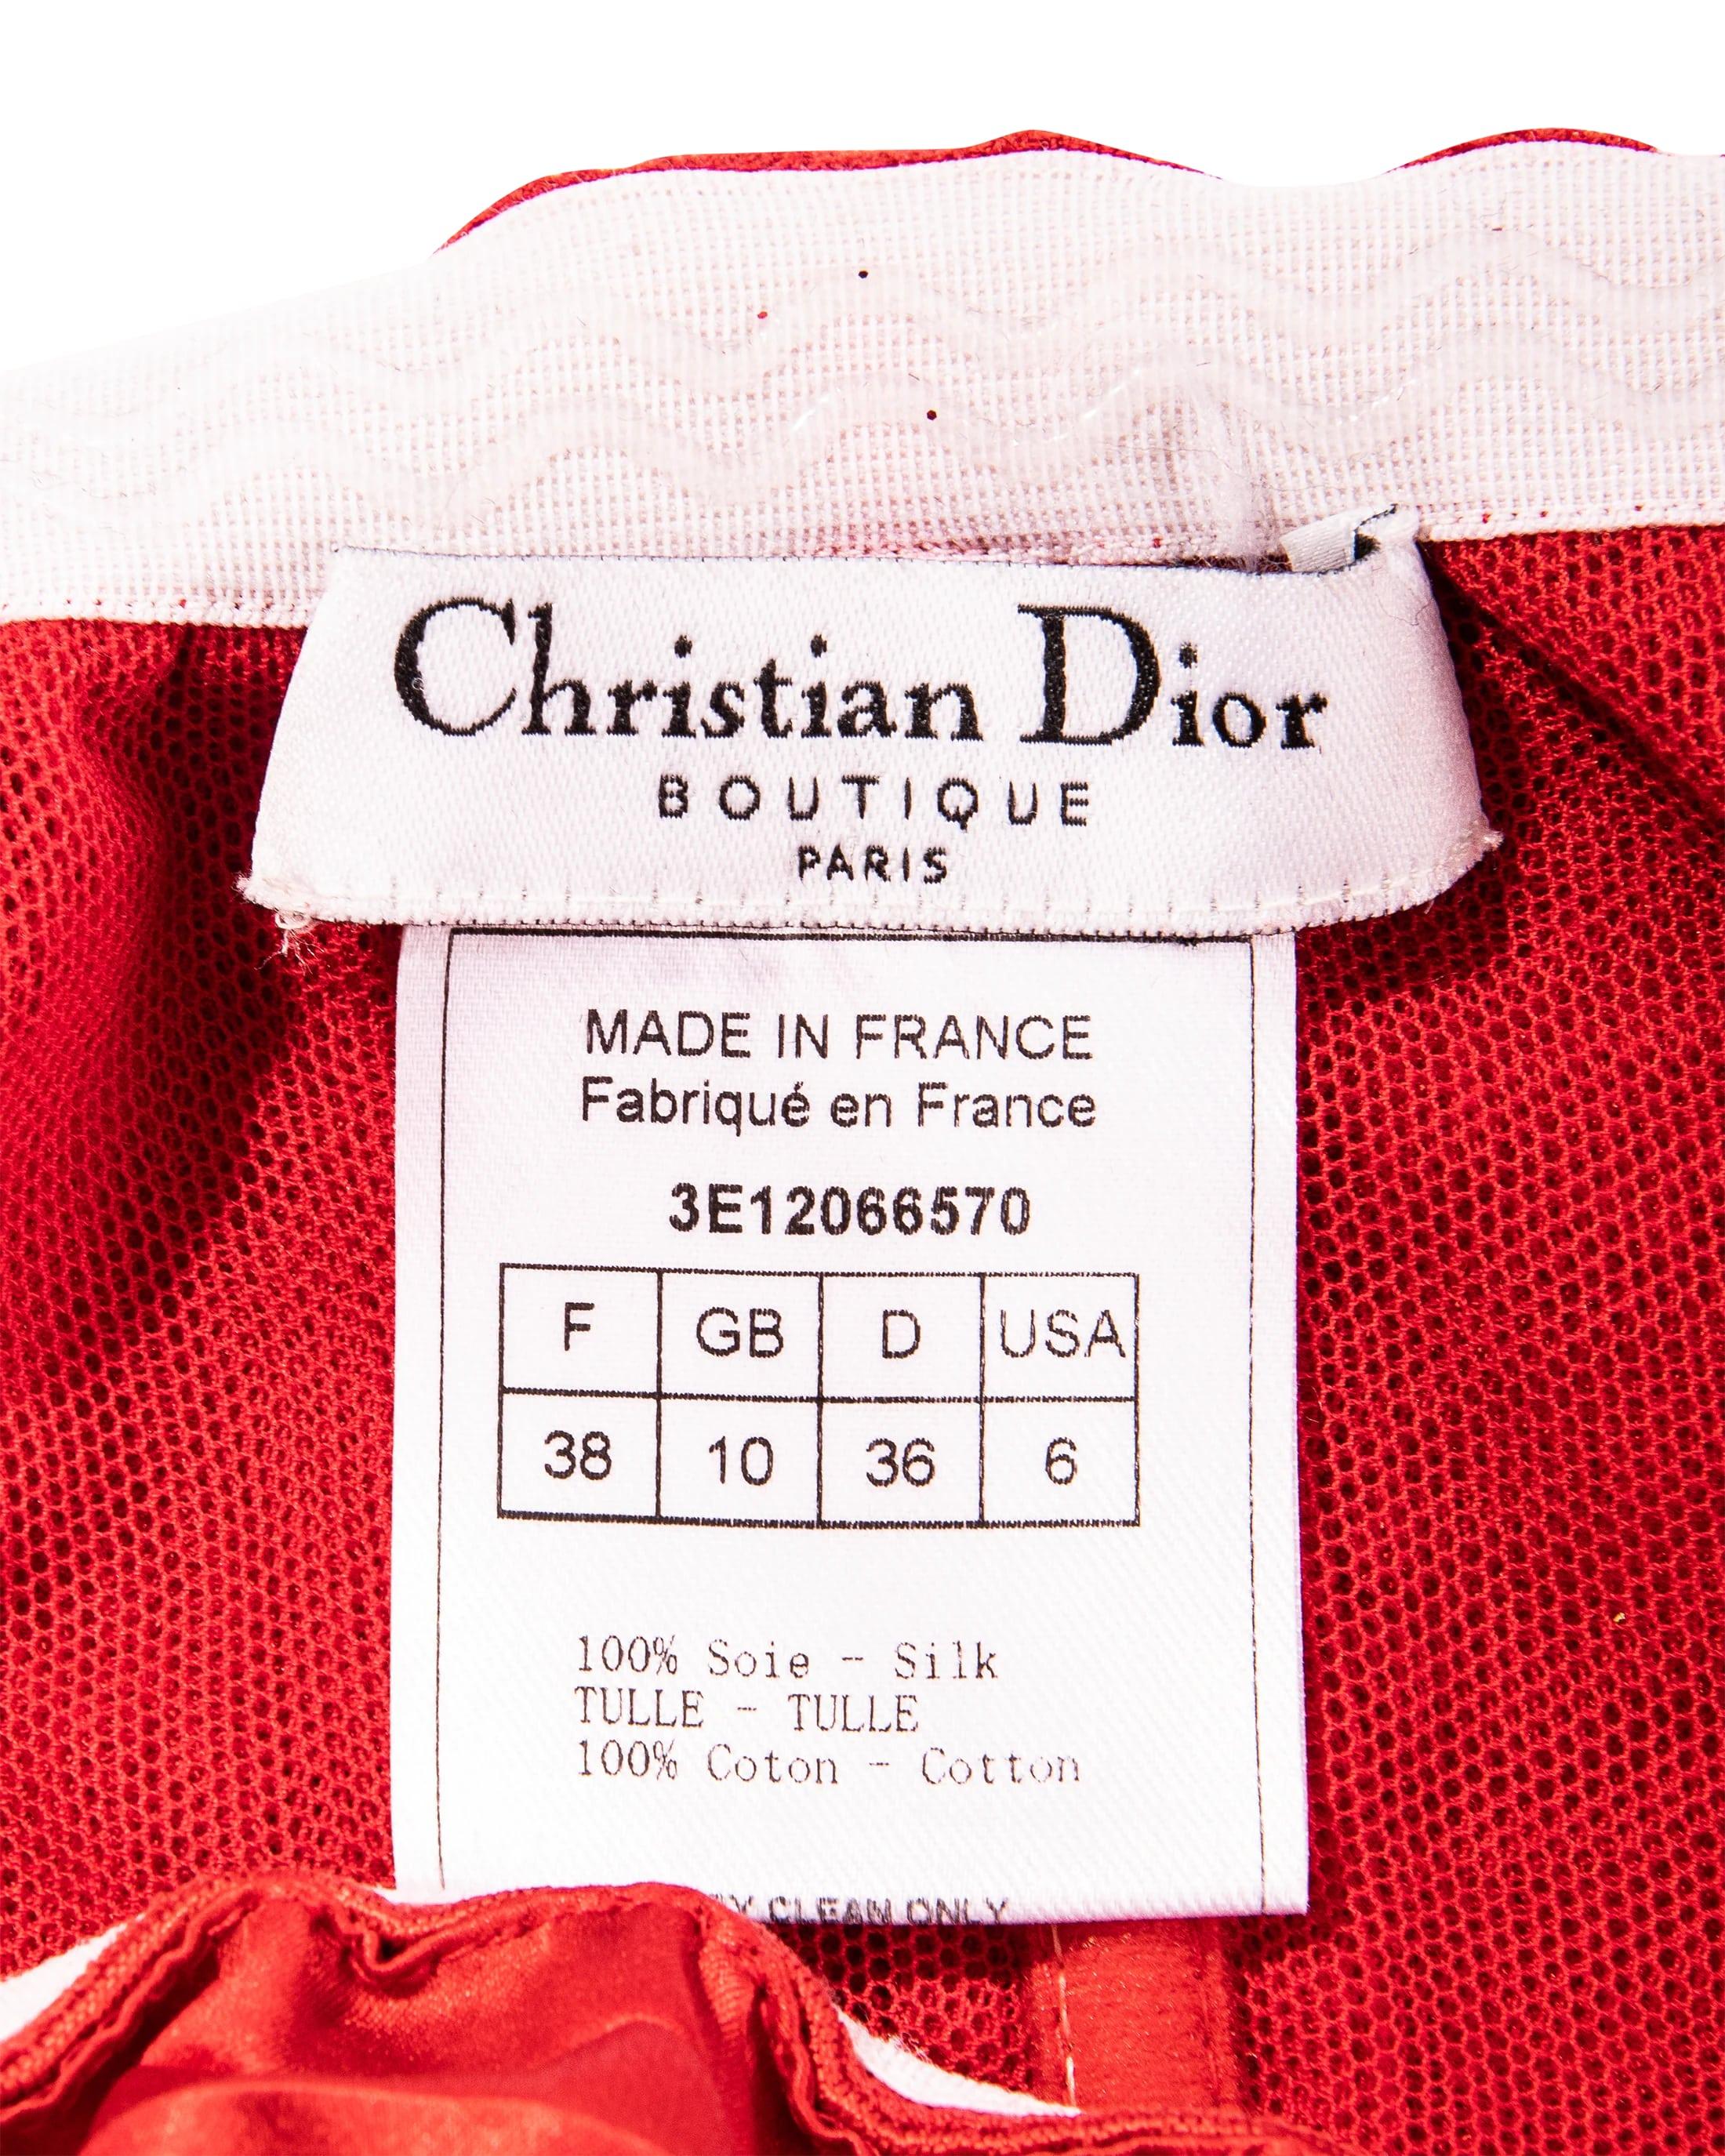 S/S 2003 Christian Dior Red Strapless Mini Dress by Galliano 1